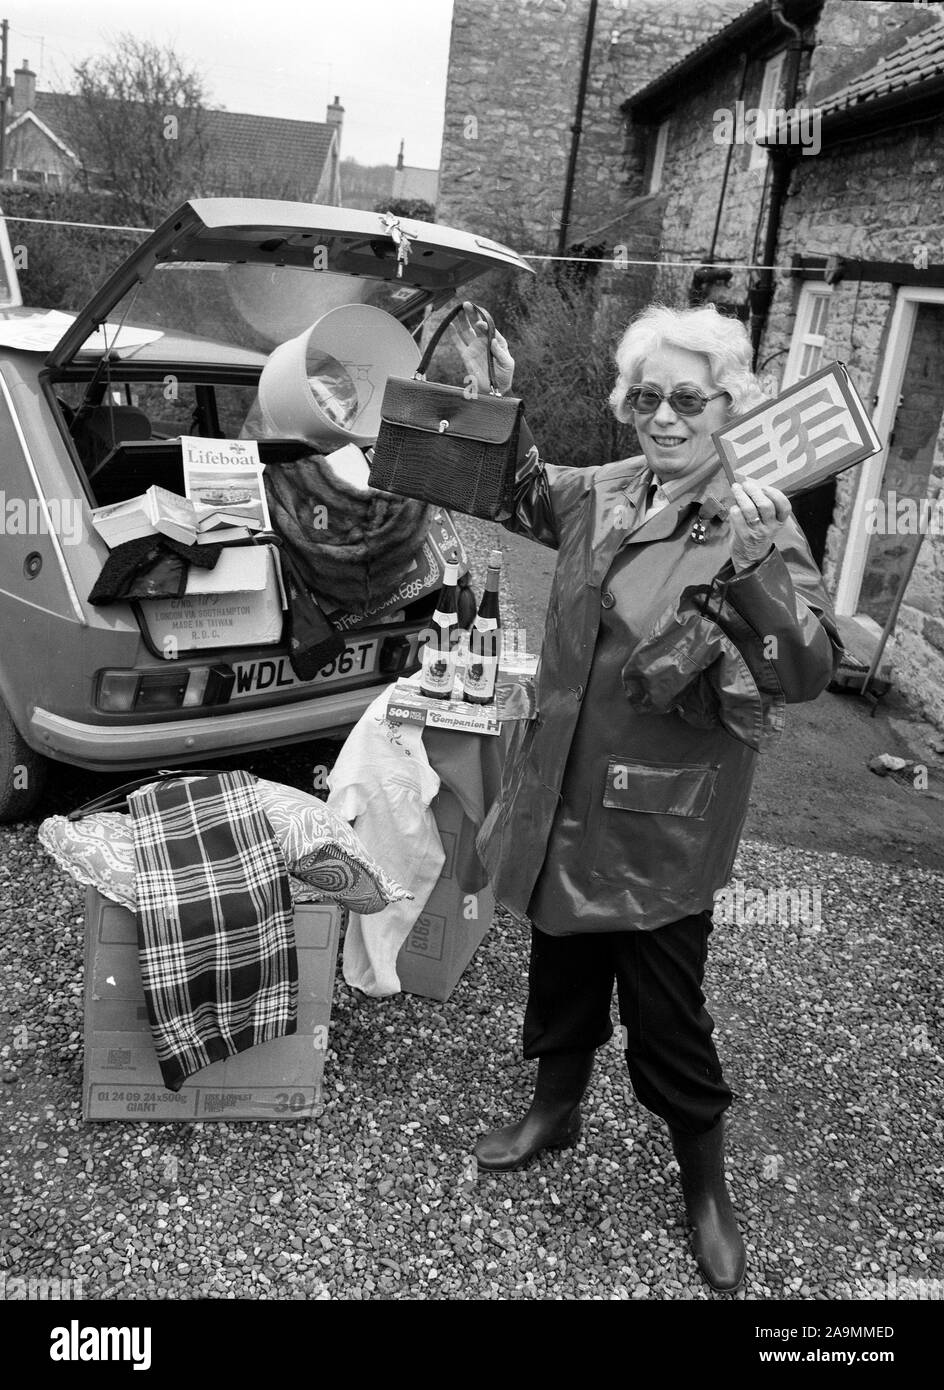 Car boot sale raising money for the RNLI Lifeboat charity Stock Photo